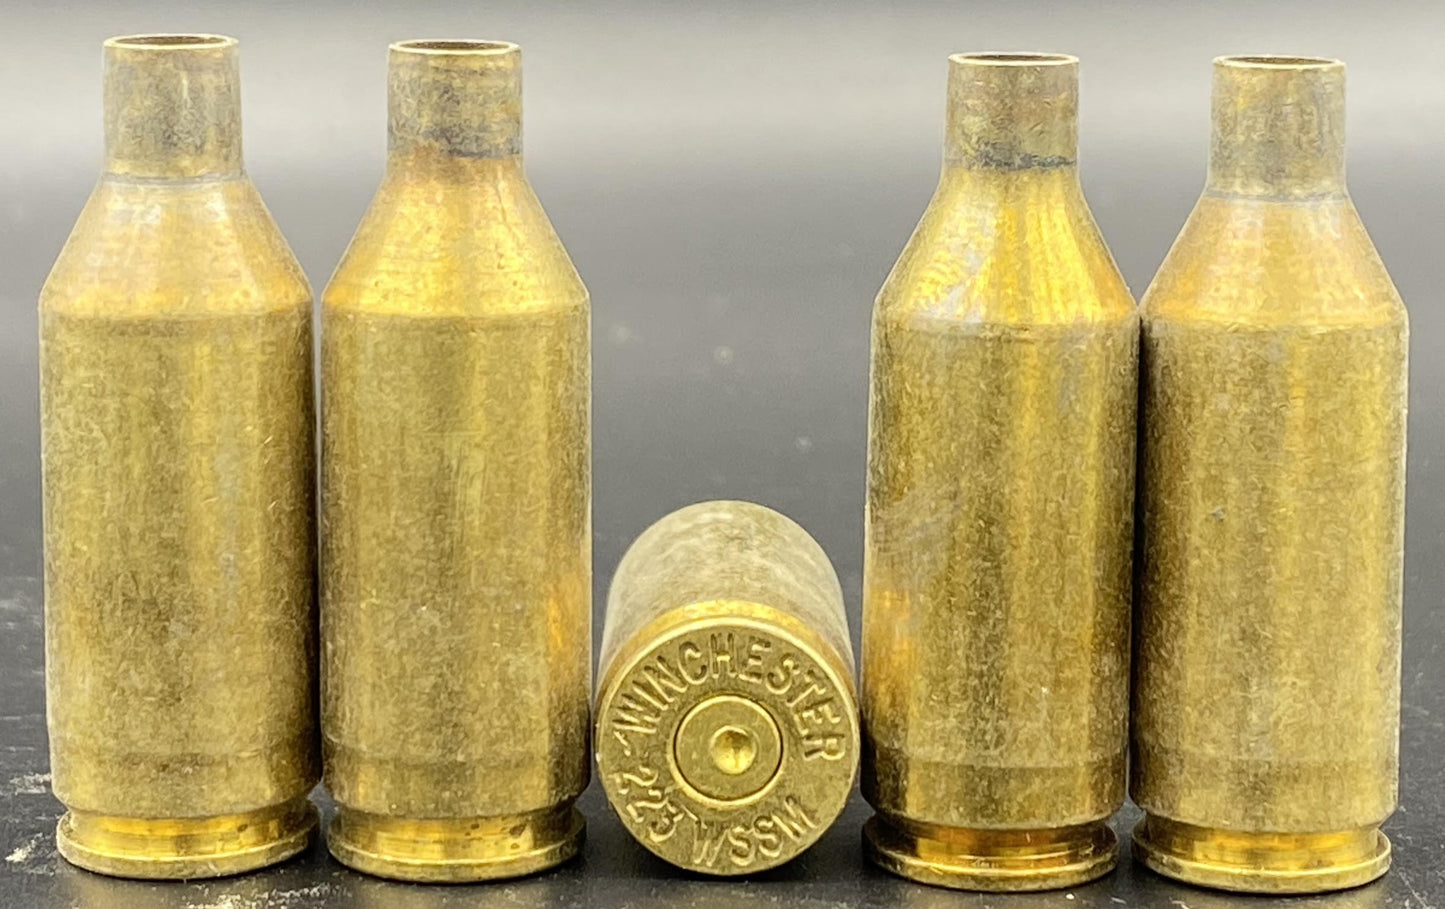 223 WSSM once fired rifle brass. Hand sorted from reputable indoor/military ranges for reloading. Reliable spent casings for precision shooting.